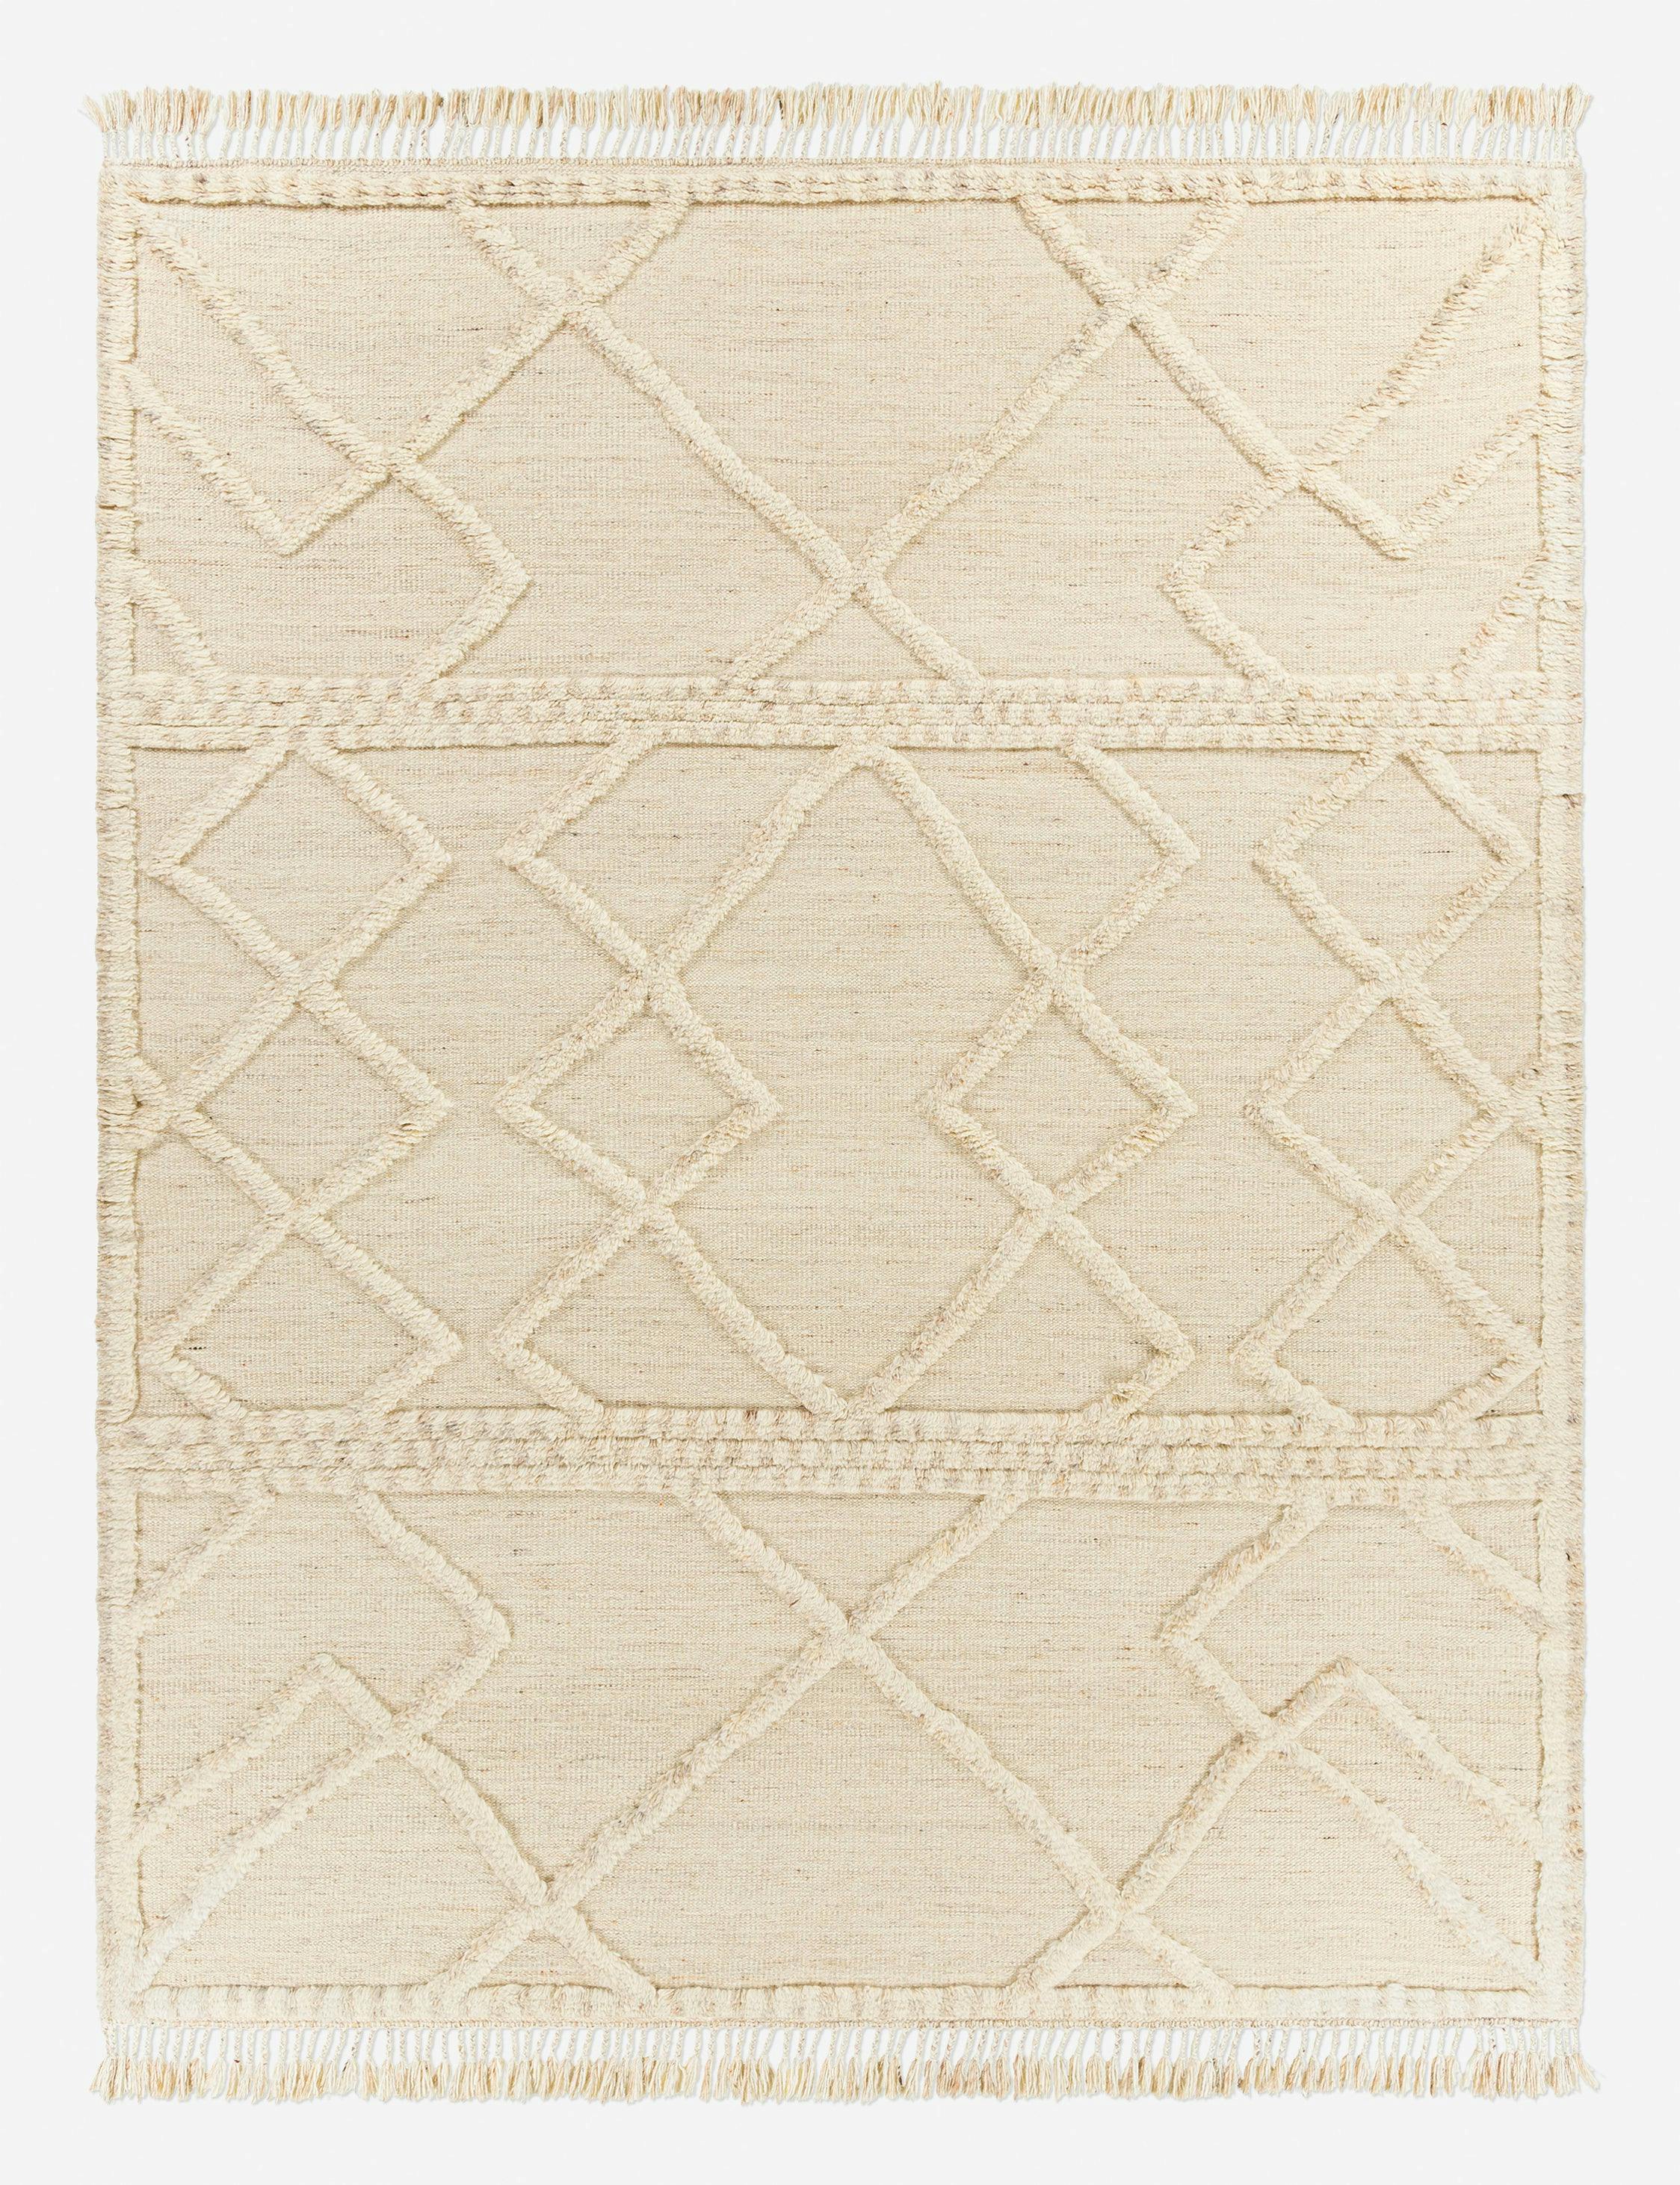 Leanna Hand-Knotted Wool Spot Gray Area Rug - 2' x 3'